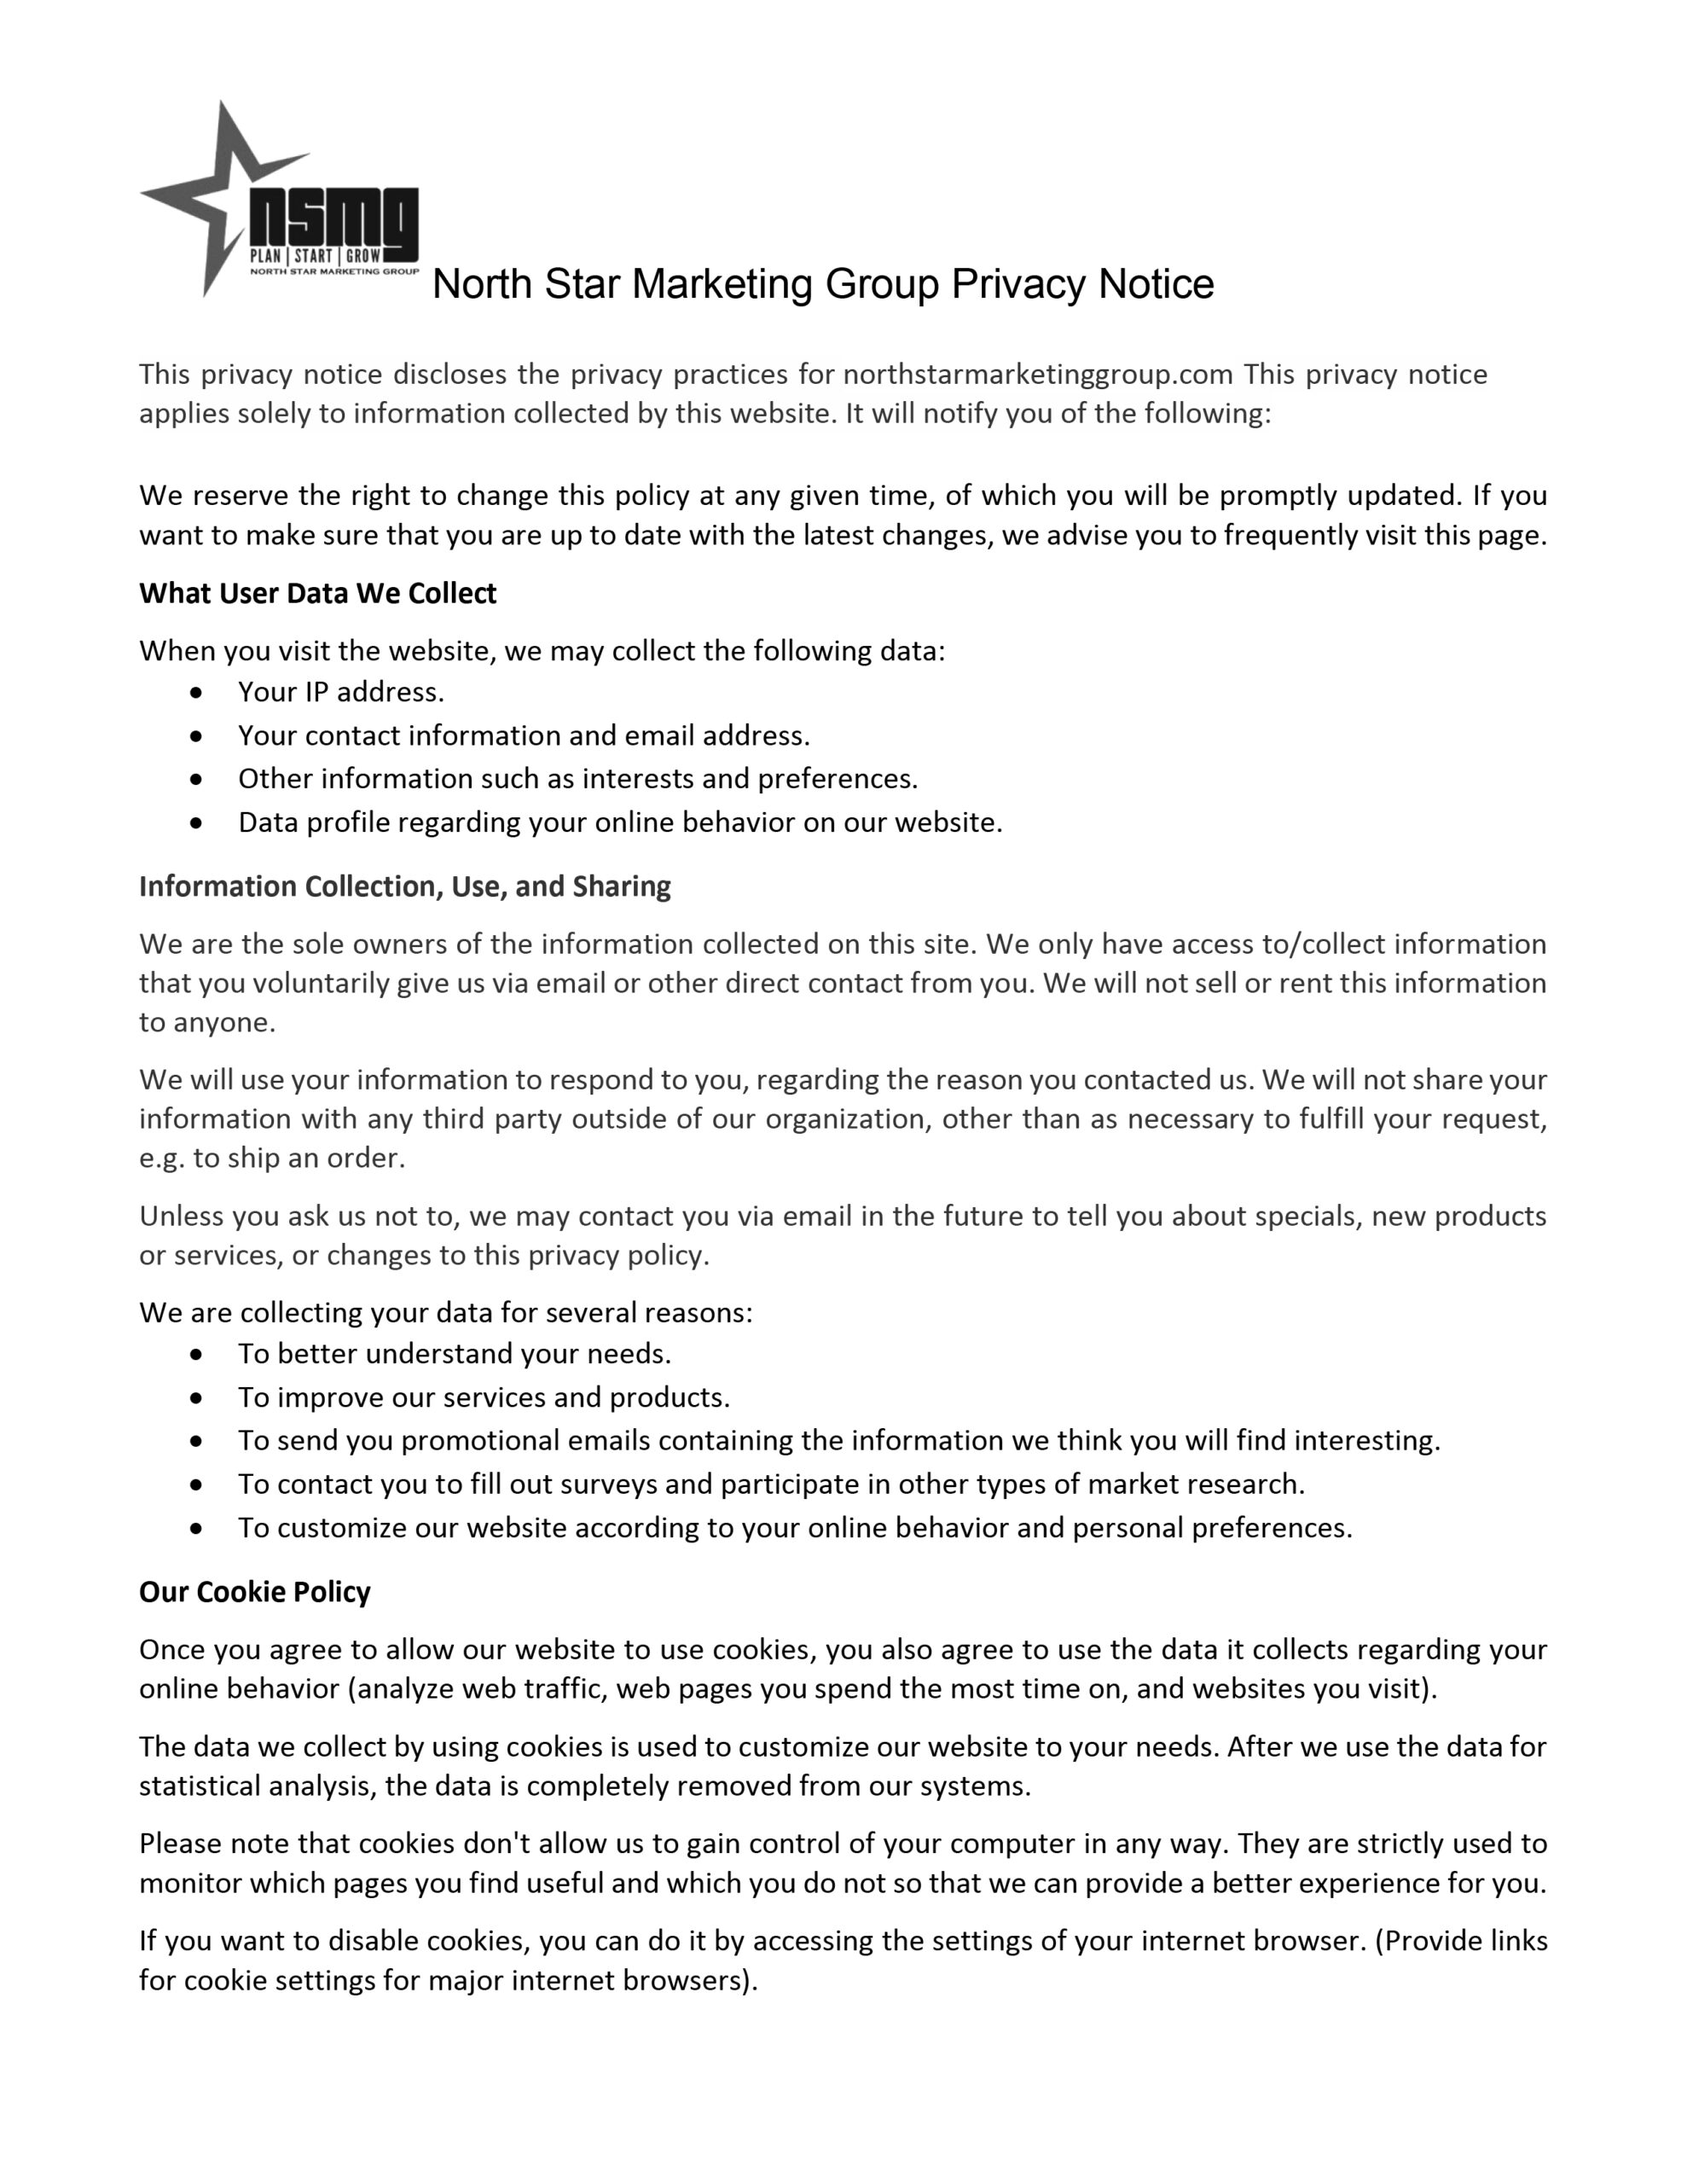 NSMG Privacy Policy page 1